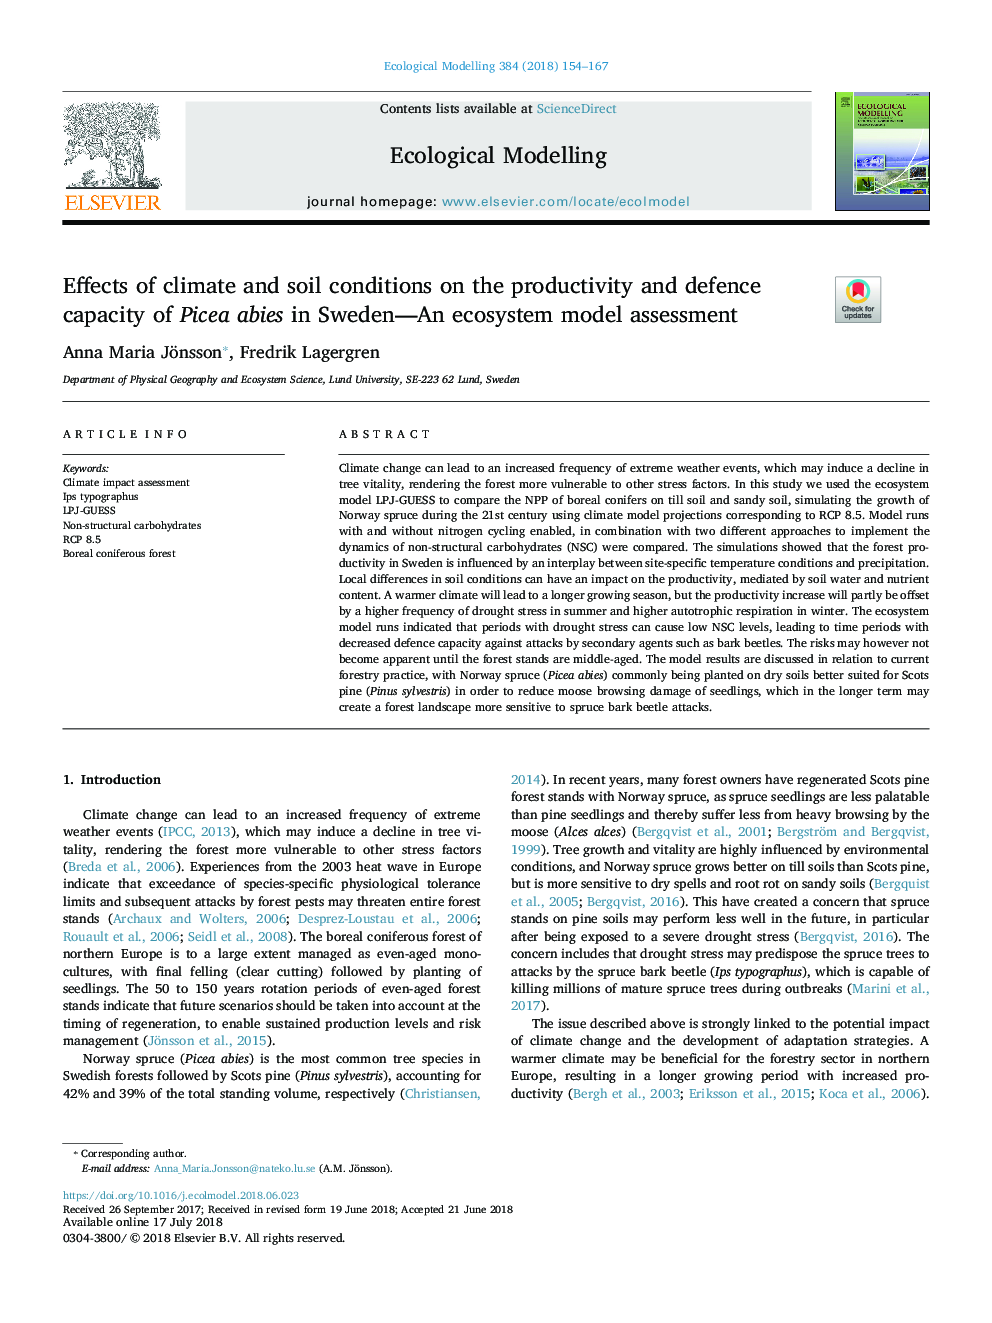 Effects of climate and soil conditions on the productivity and defence capacity of Picea abies in Sweden-An ecosystem model assessment